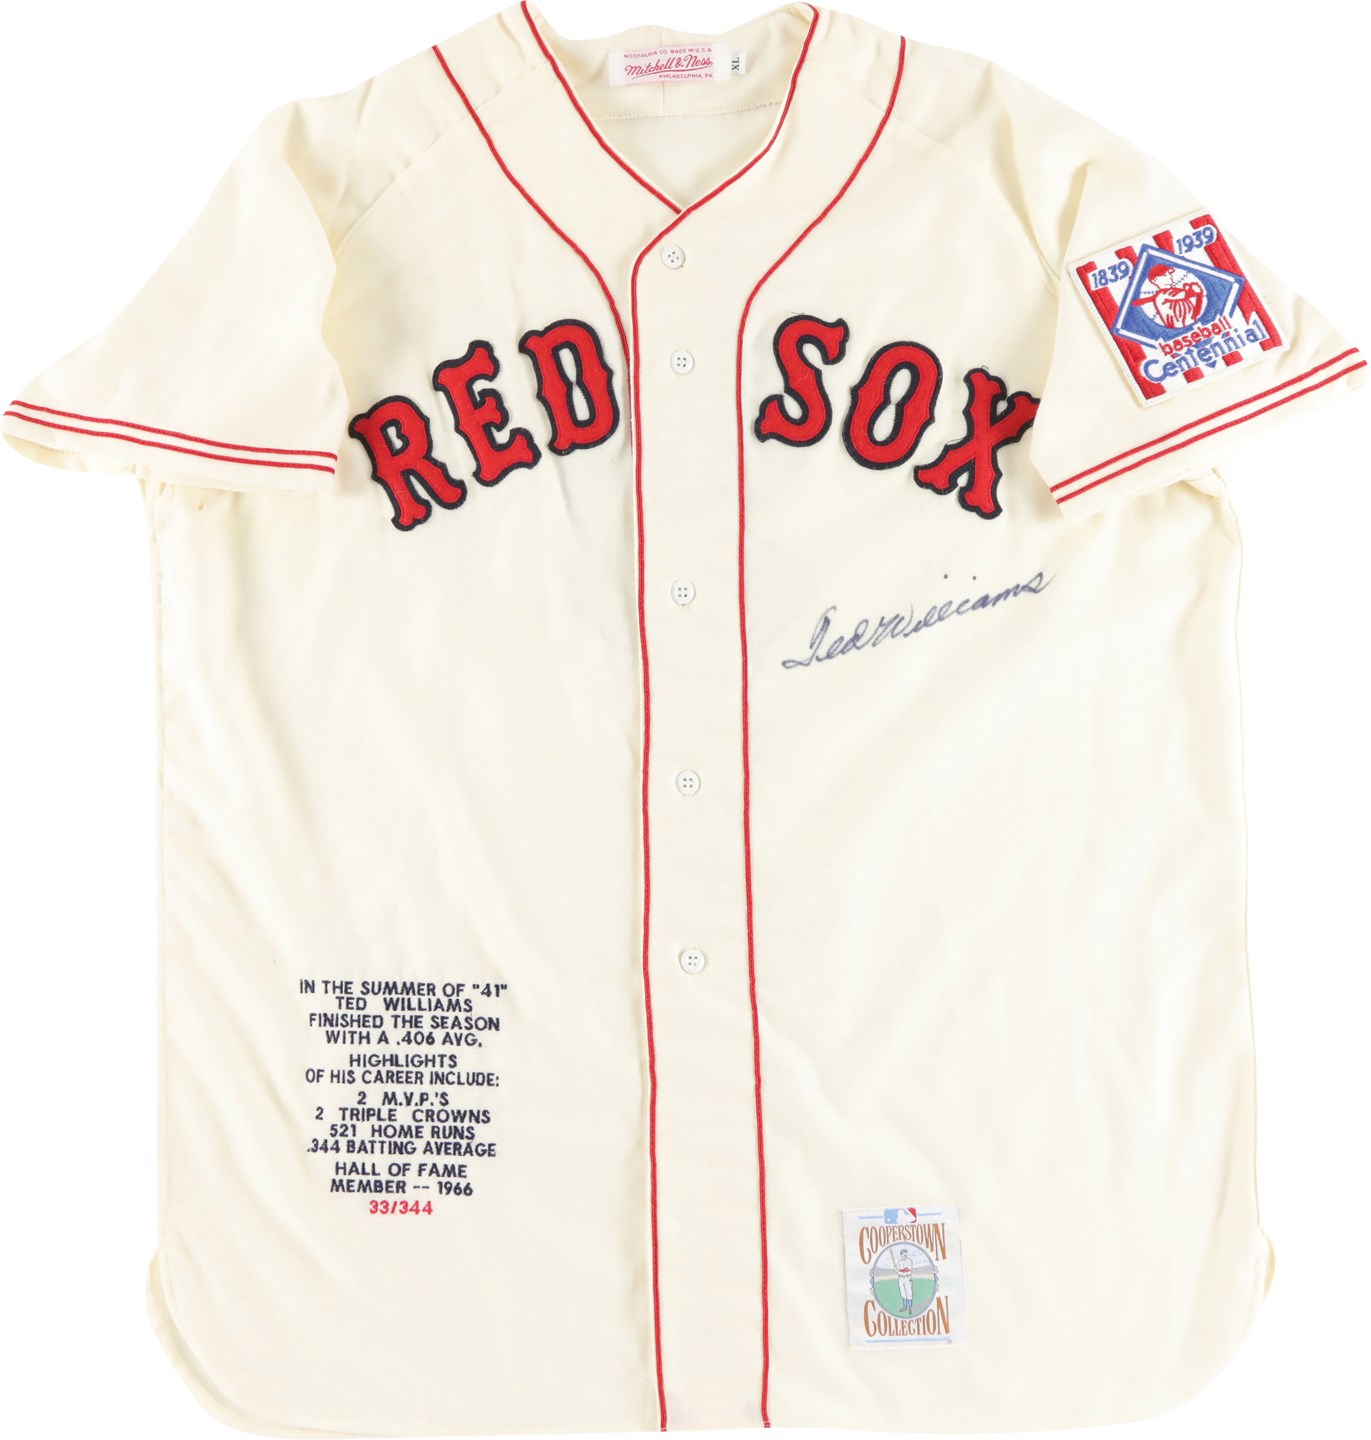 Baseball Autographs - Ted Williams Signed Limited Edition 1939 Boston Red Sox Jersey 33/344 (Green Diamond COA & Proof of Signing)